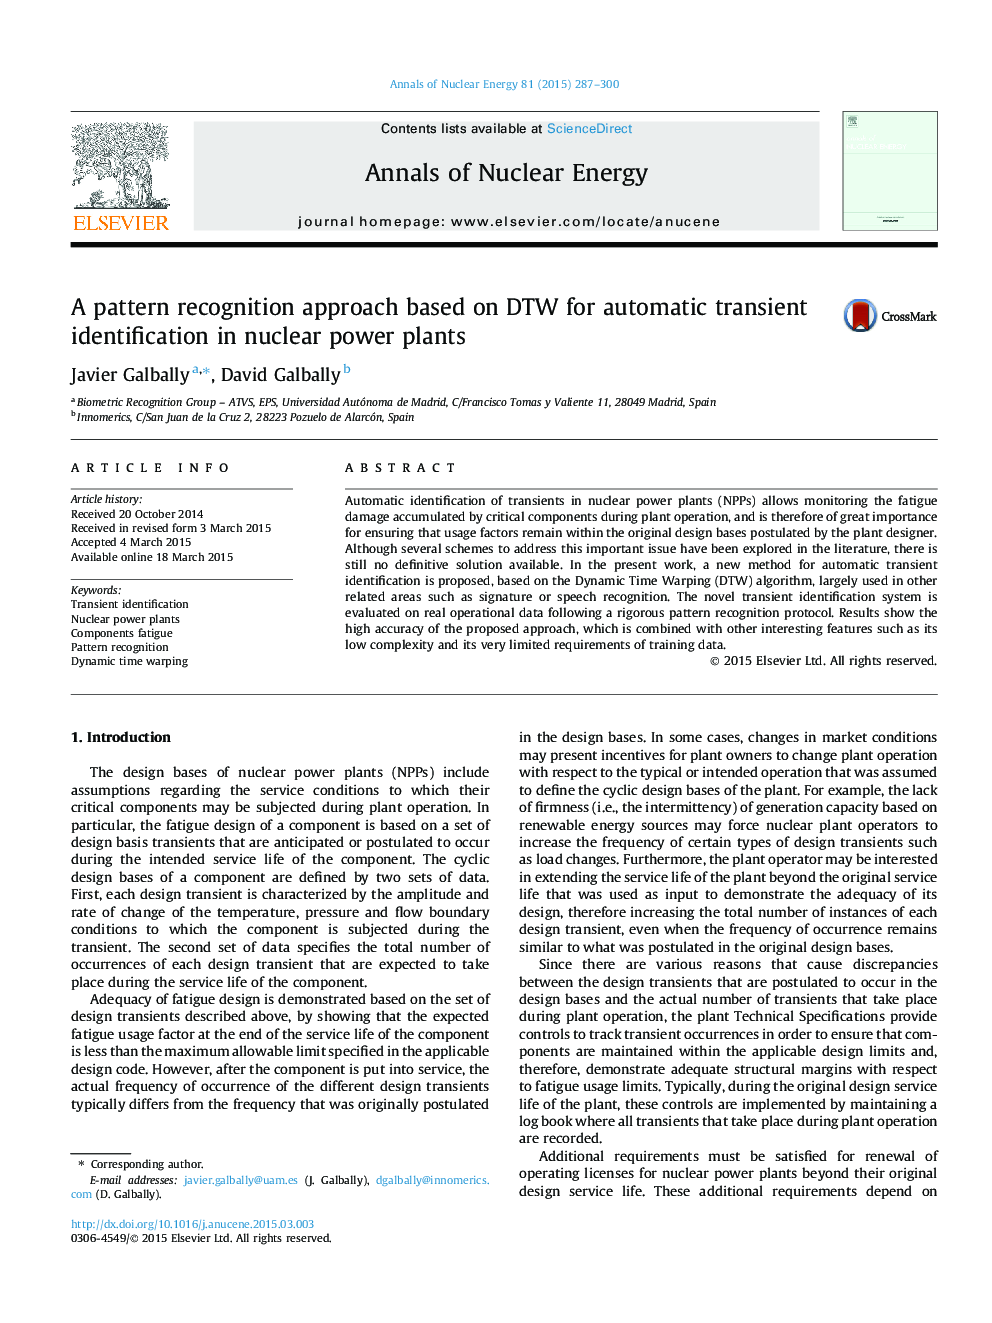 A pattern recognition approach based on DTW for automatic transient identification in nuclear power plants